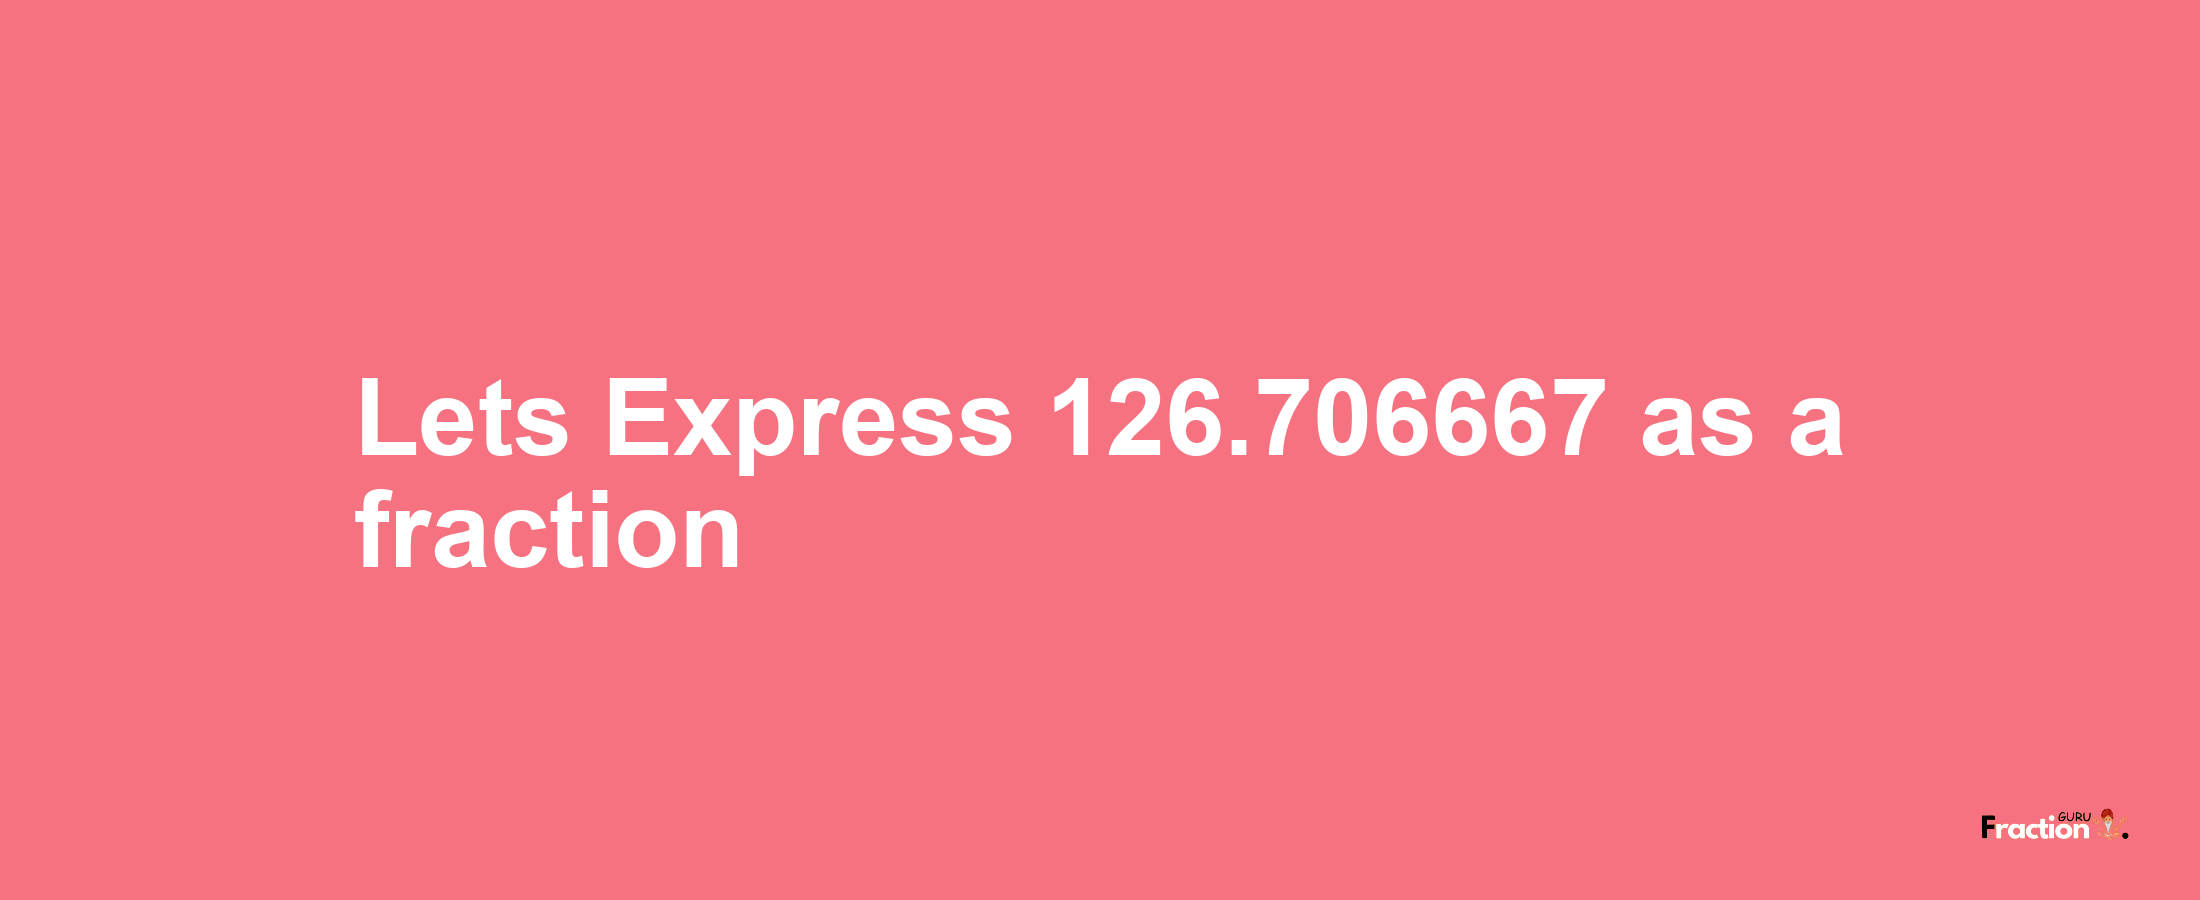 Lets Express 126.706667 as afraction